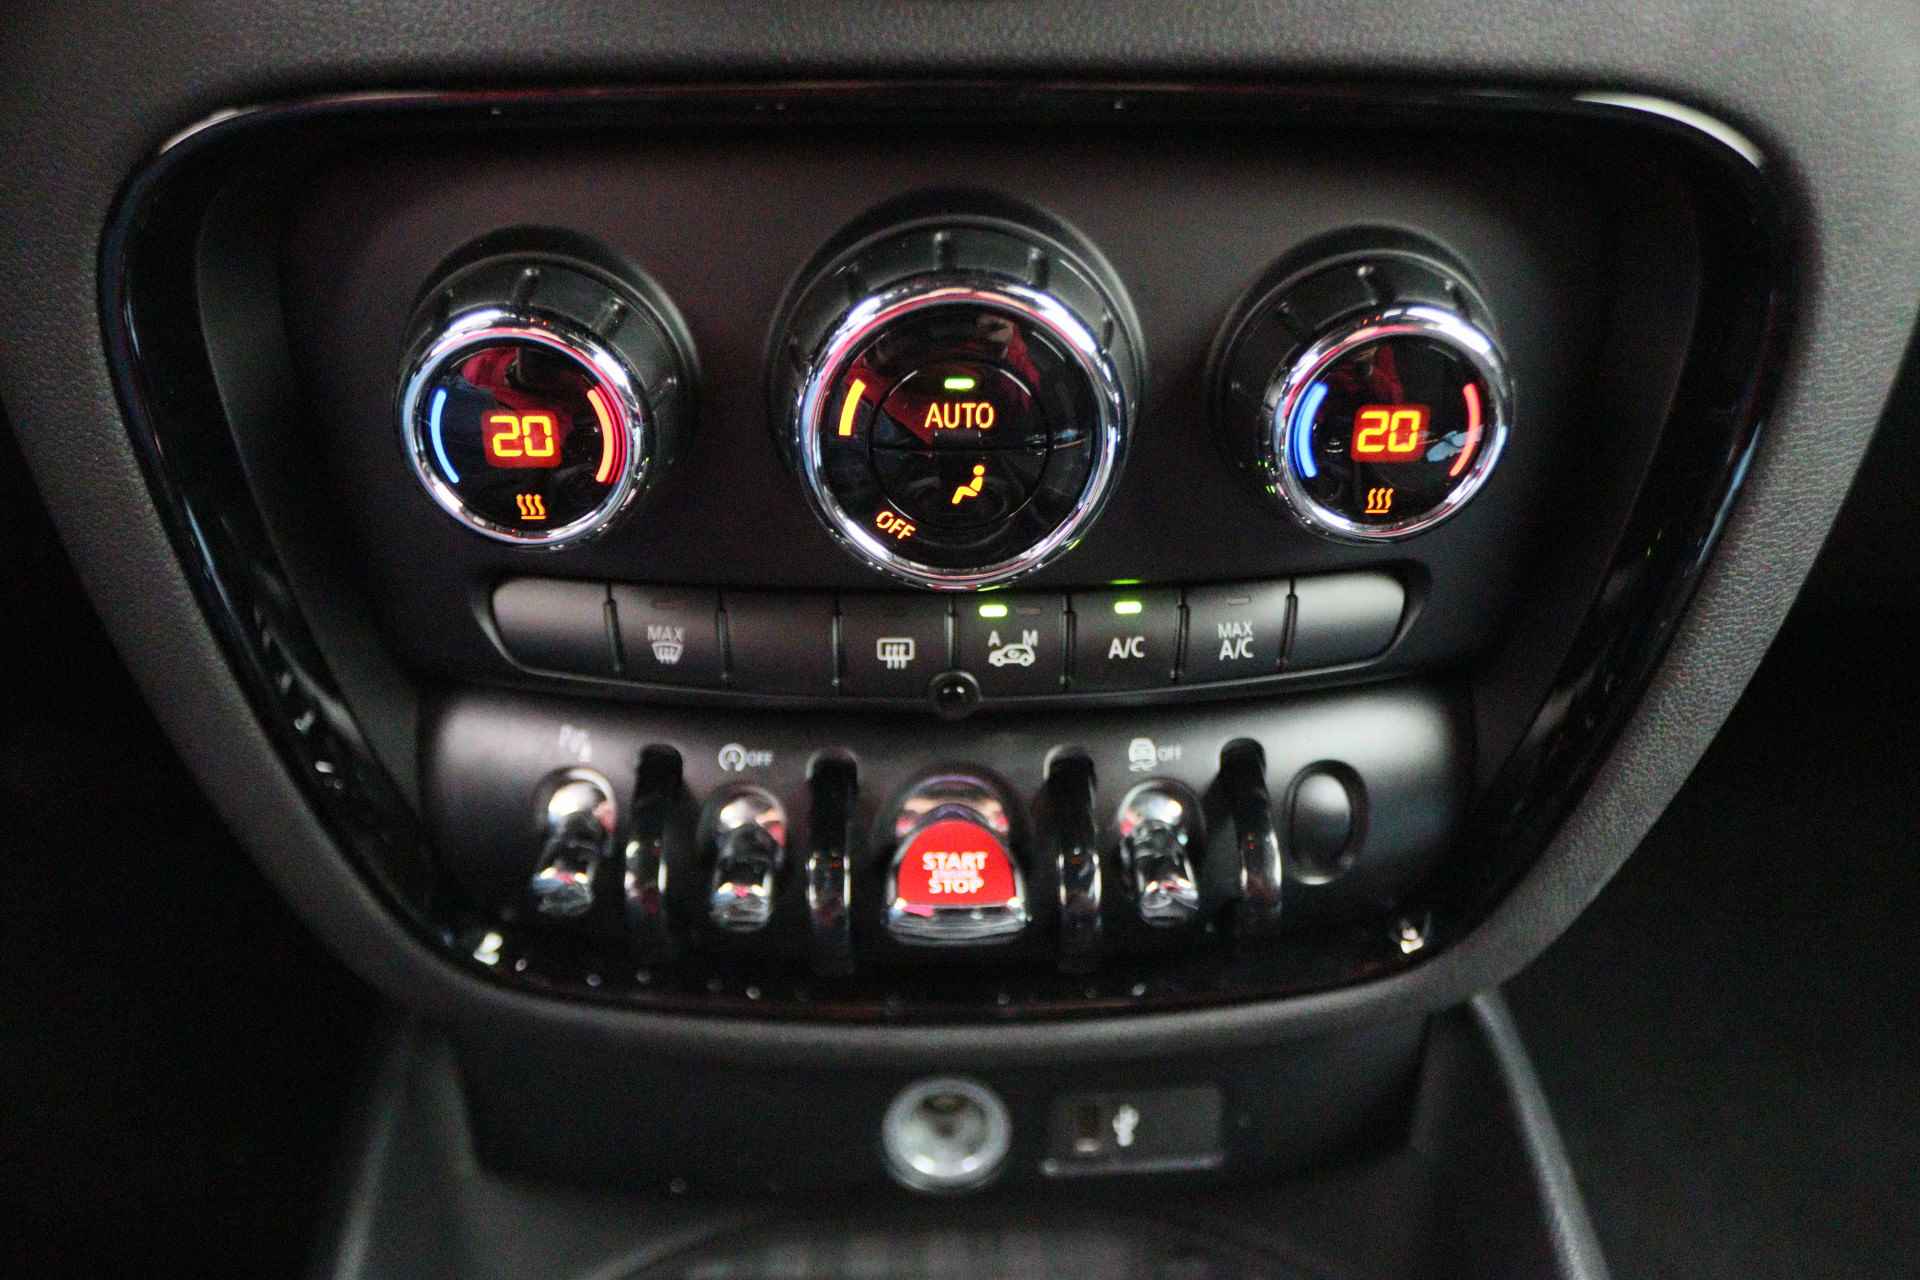 MINI Clubman 1.5 Cooper Business Edition Automaat LED, Keyless, Two-Tone lak, Navigatie, Cruise, PDC, Climate, 17” - 37/44